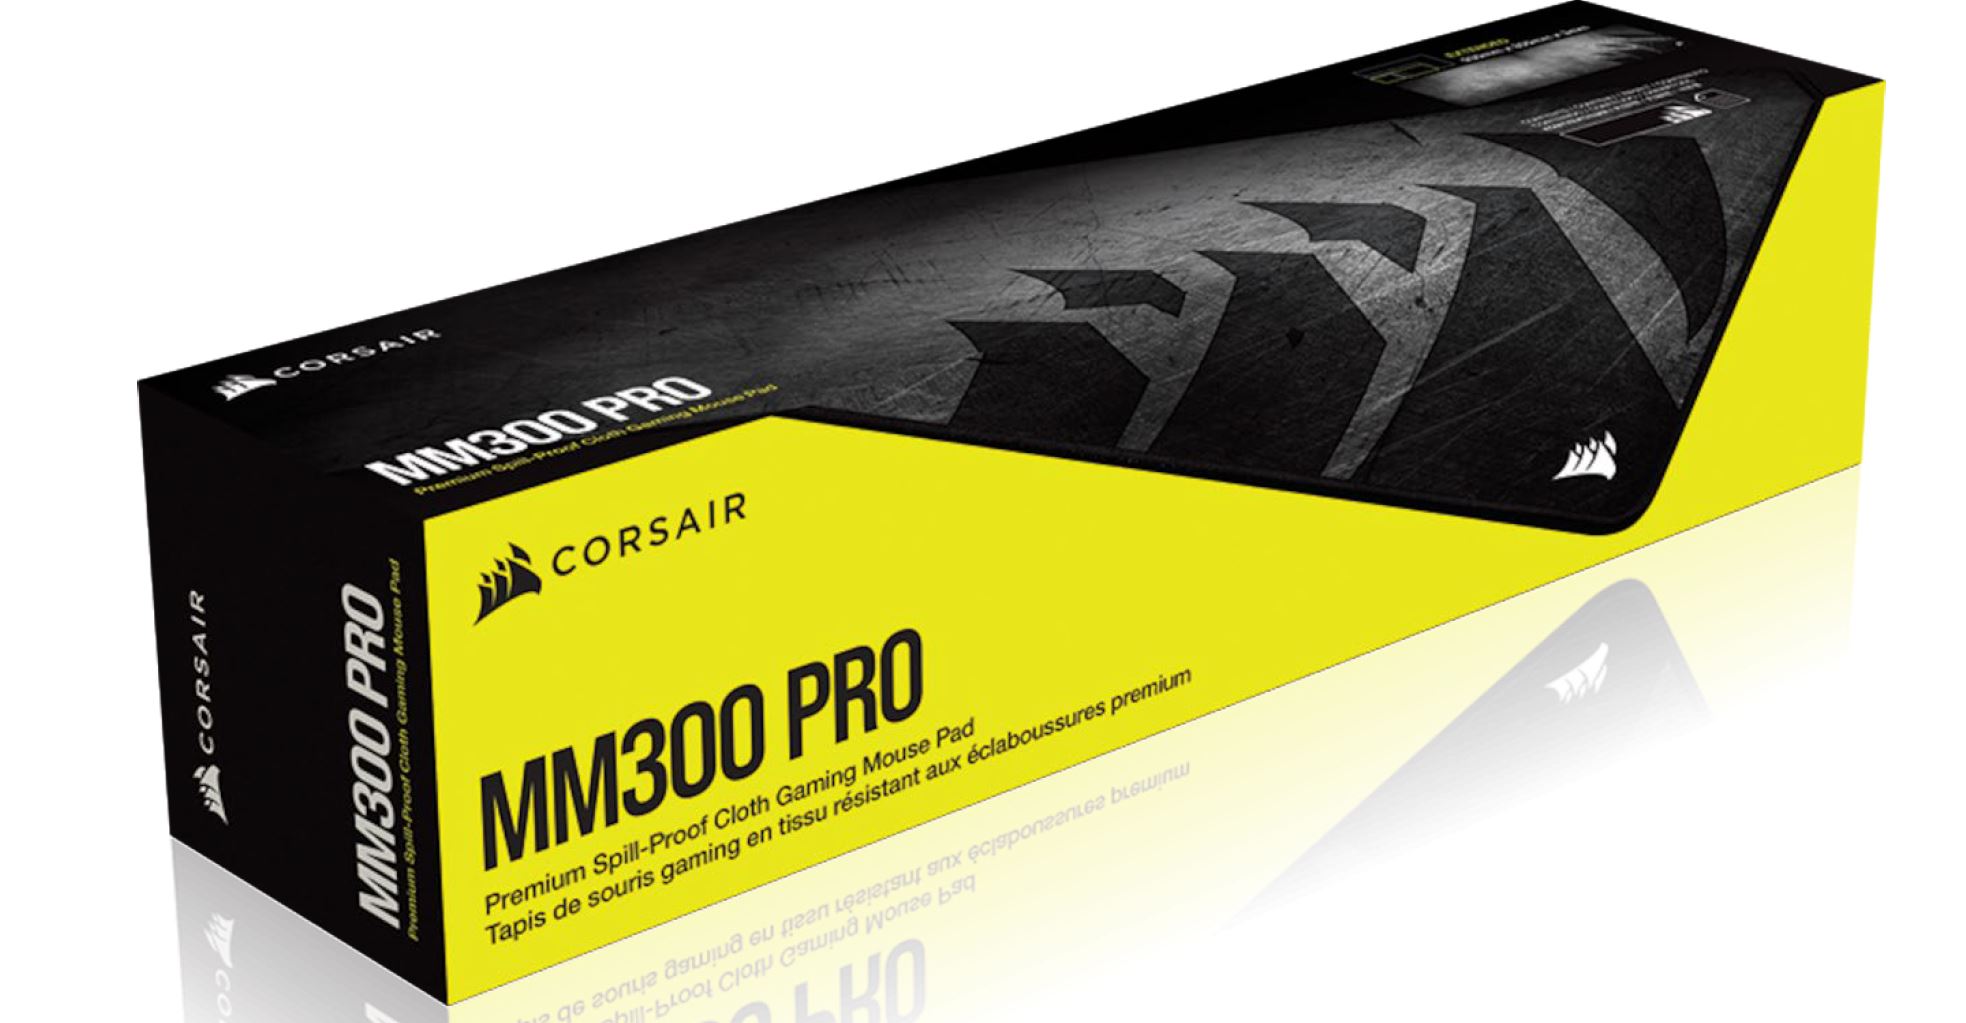 buy Corsair MM300 PRO Premium Spill-Proof Cloth Gaming Mouse Pad â€“ Extended 930mm x 300mm x 3mm - Graphic Surface online from our Melbourne shop